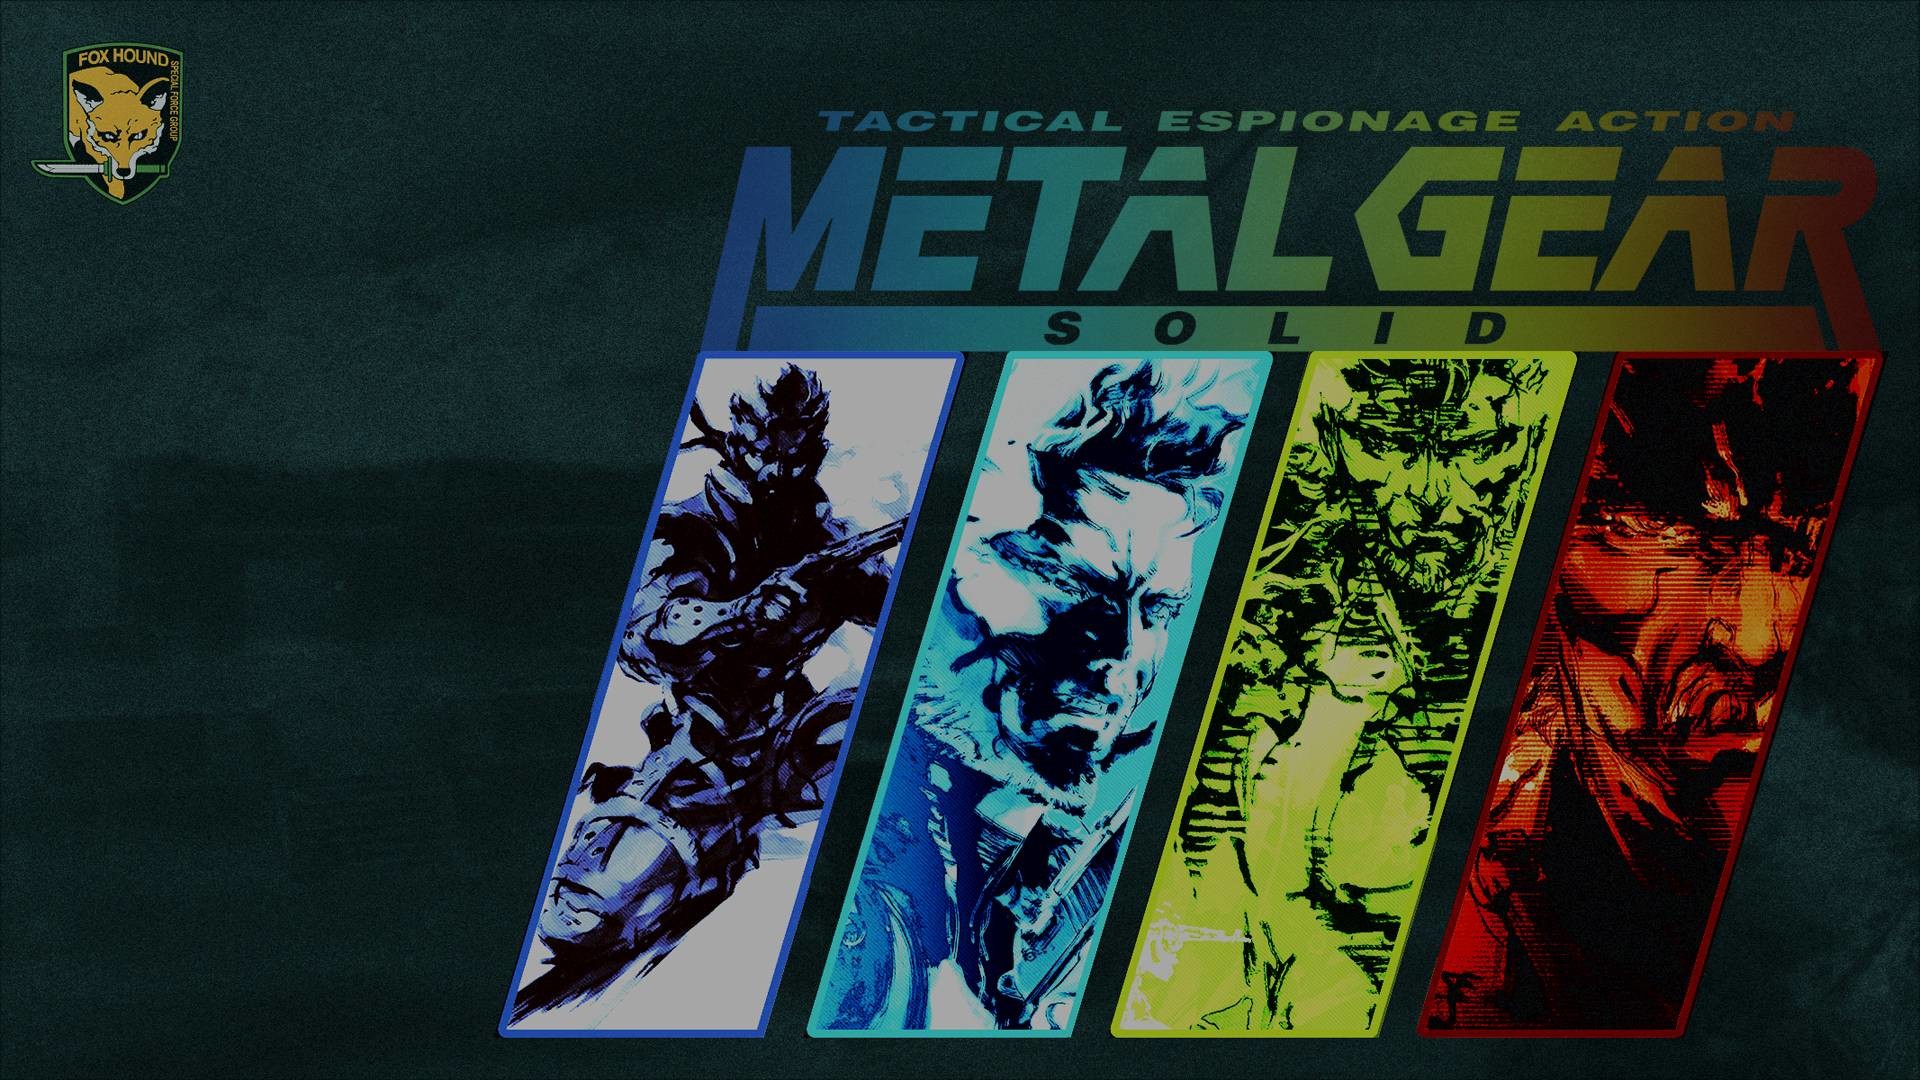 1920x1080 metal gear solid one wallpapers - DriverLayer Search Engine